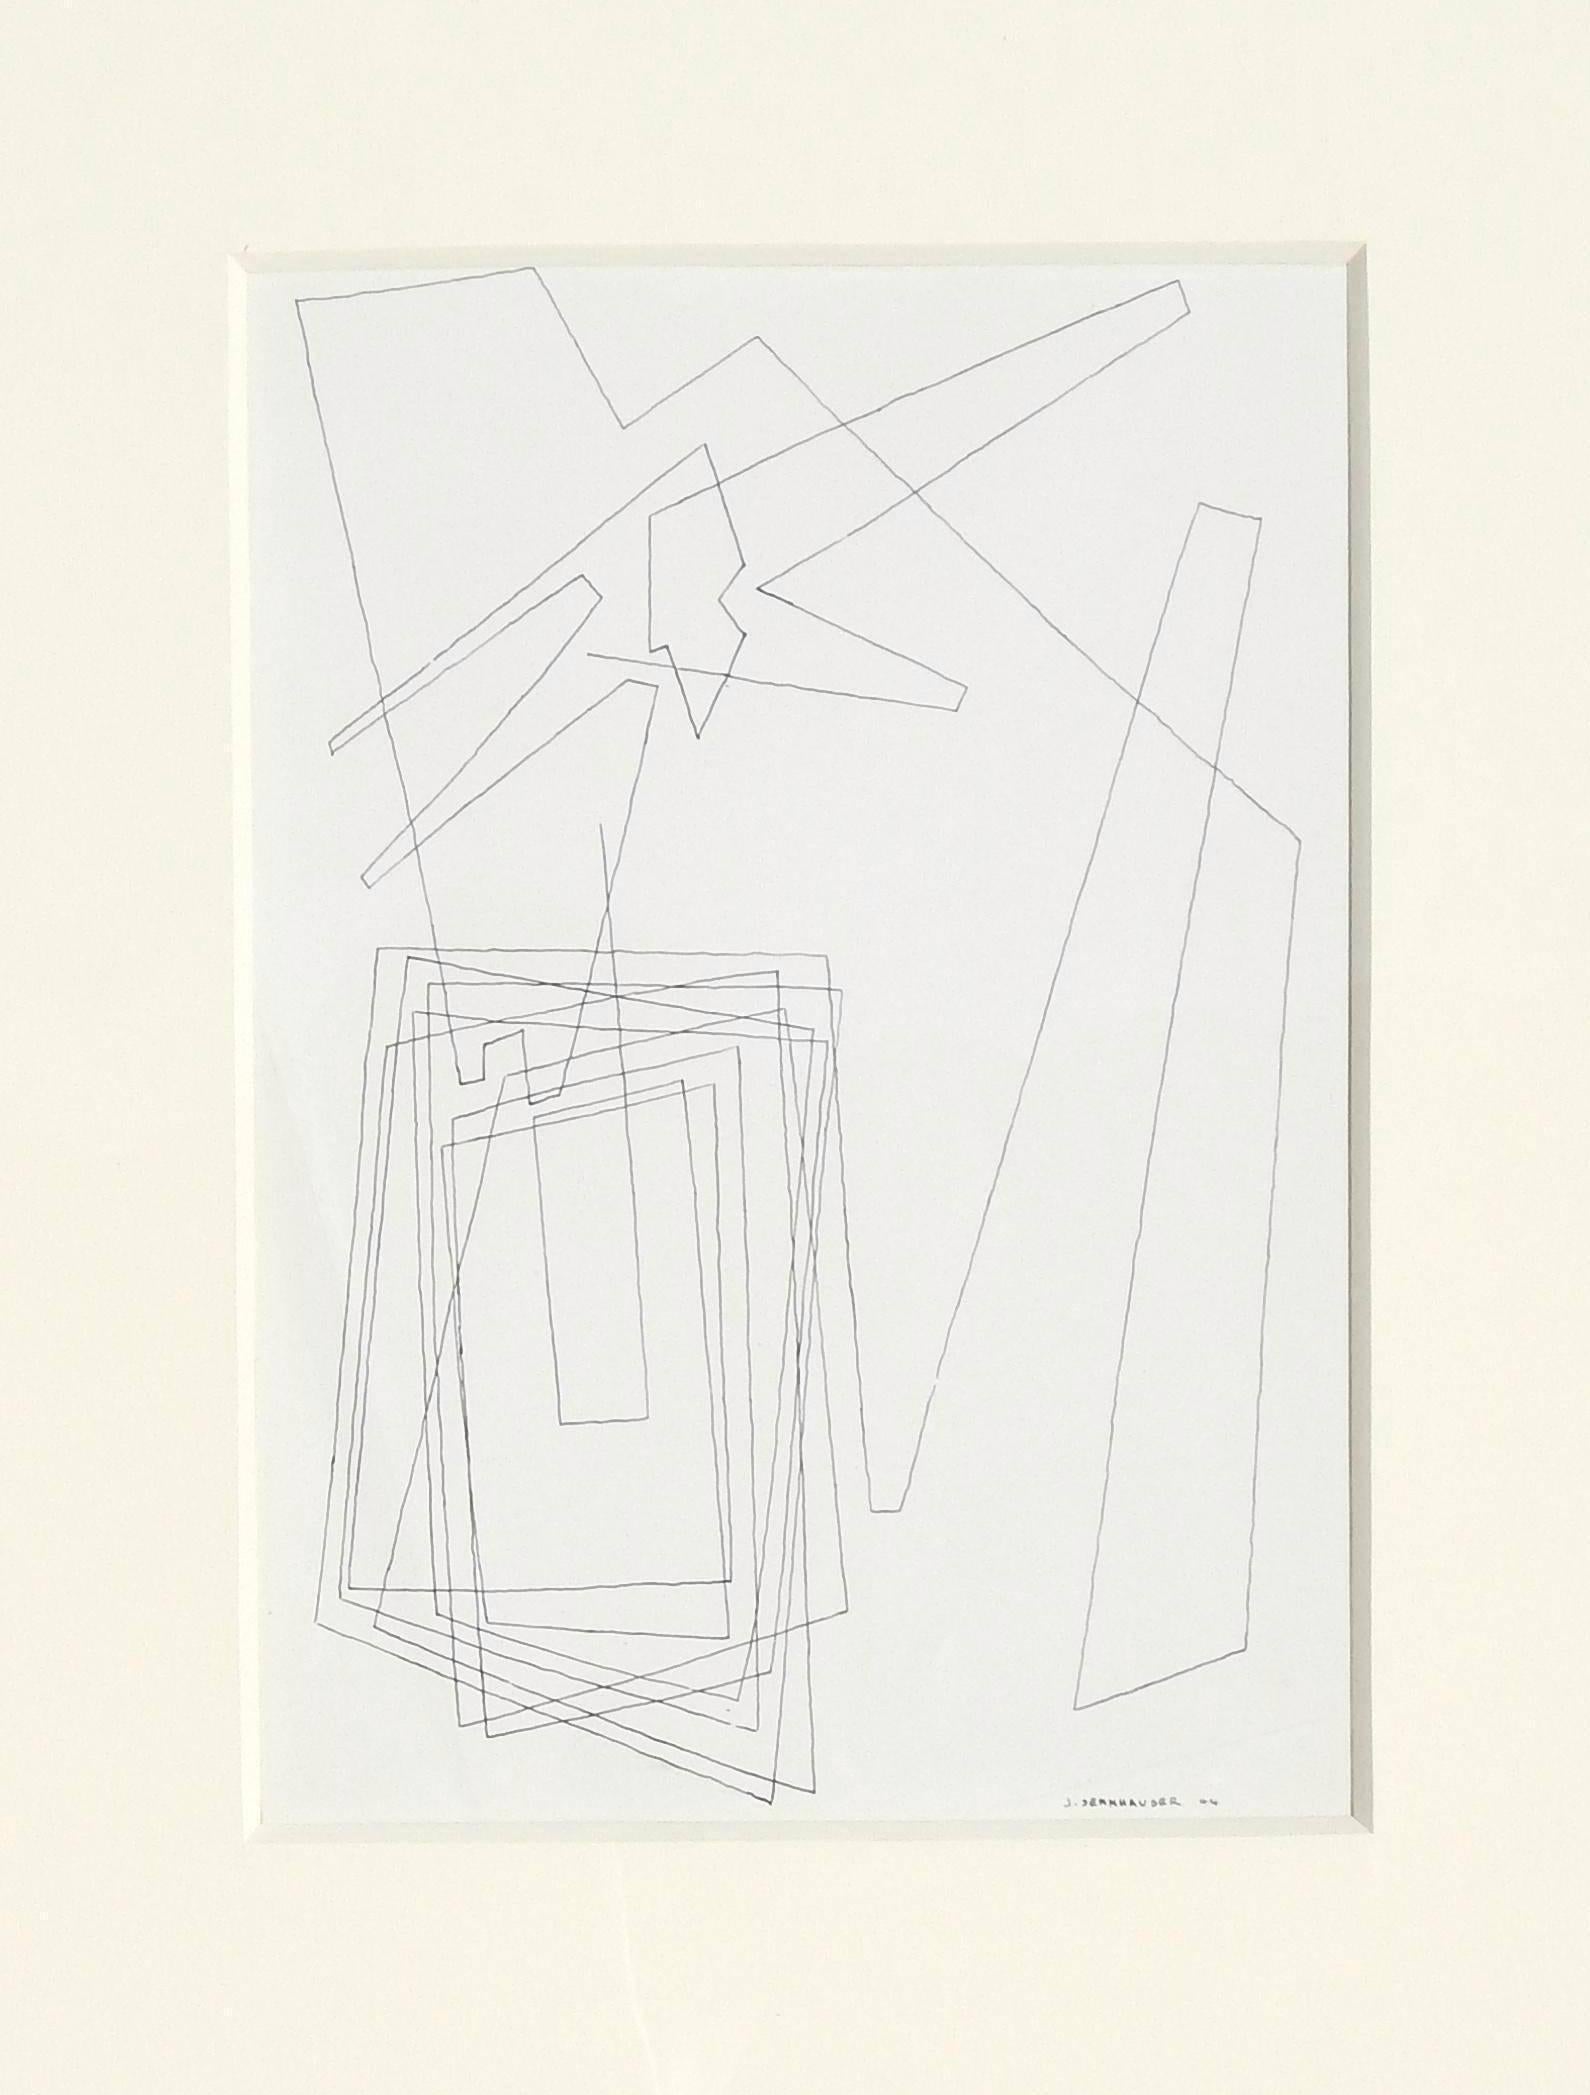 Original pen and ink drawing by New York Abstract Artist, John Sennhauser (1907-1978)
Signed lower right 